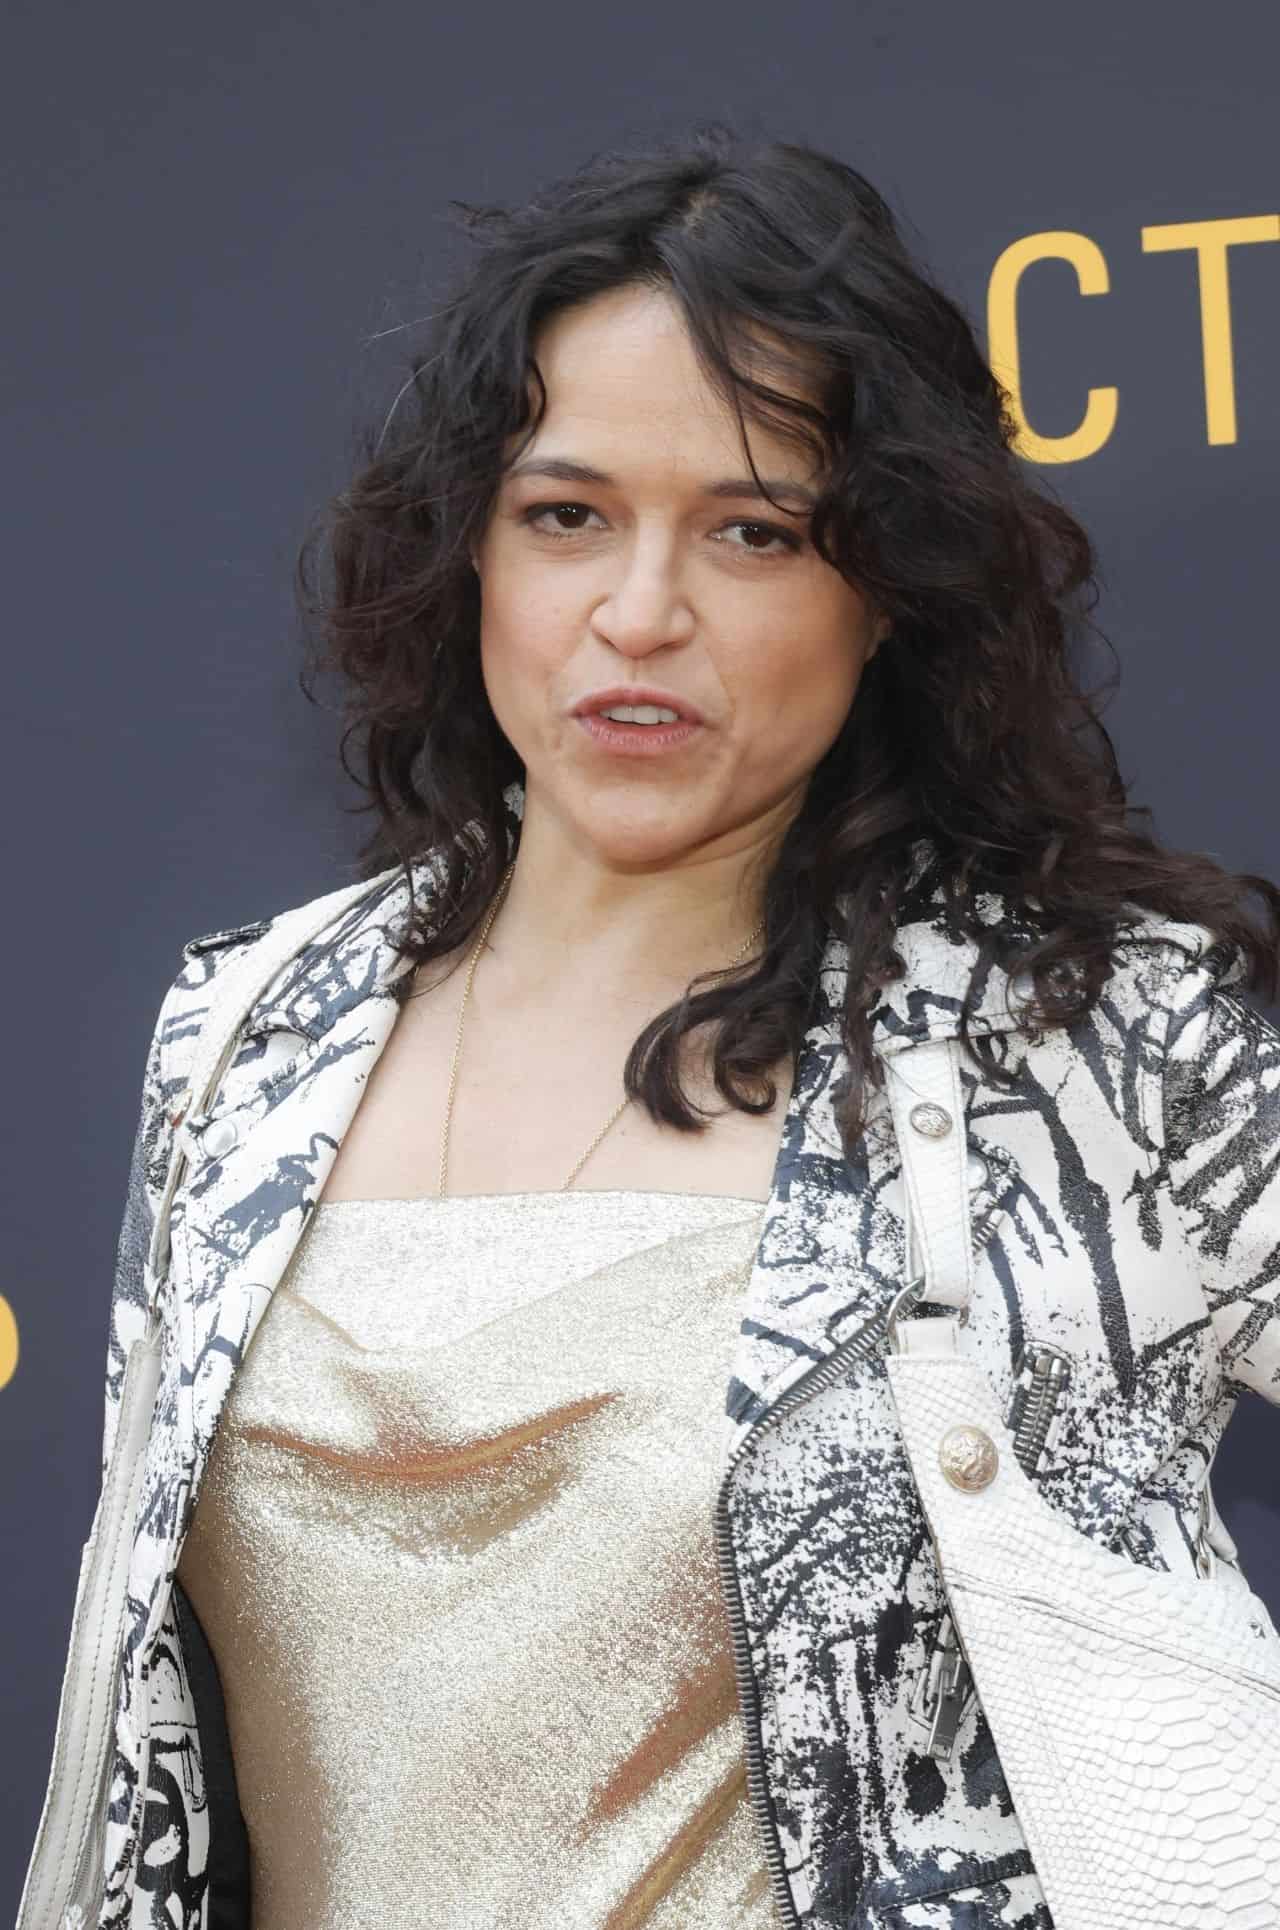 Michelle Rodriguez Rocks the Red Carpet in a Gold Dress and Leather Jacket